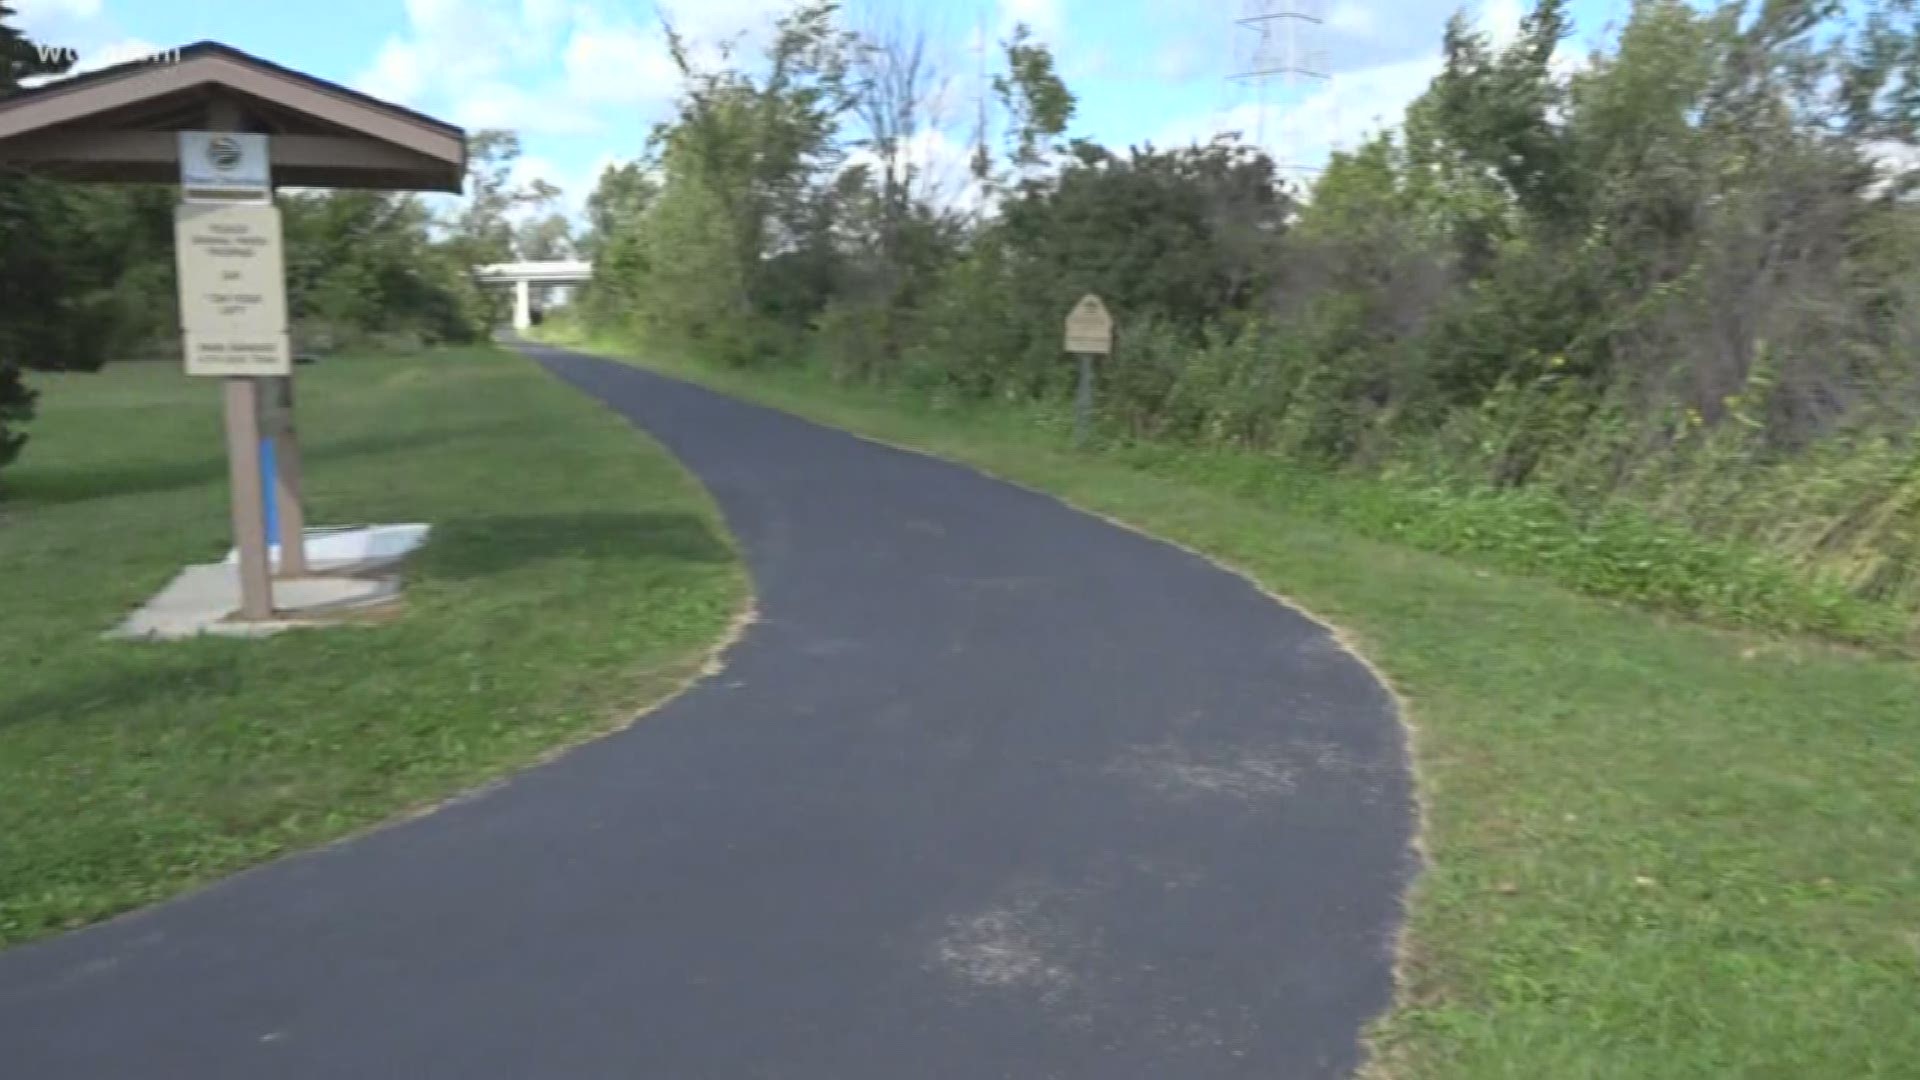 The project would connect the school's campus to the rest of Fremont through a trail for cyclists and pedestrians.